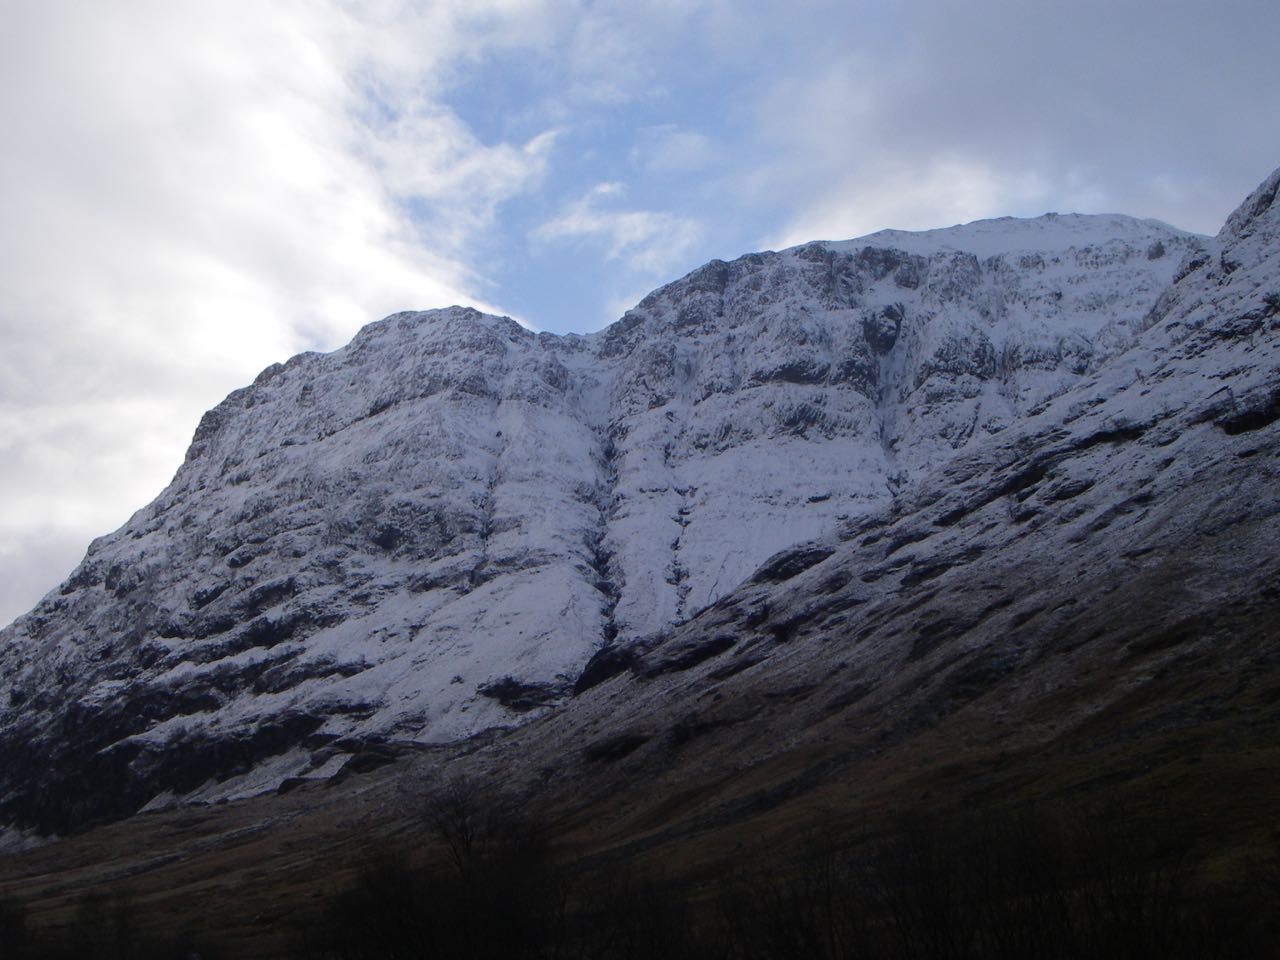 The West (North-West) Face  of Aonach Dubh showing signs of cross loading higher up